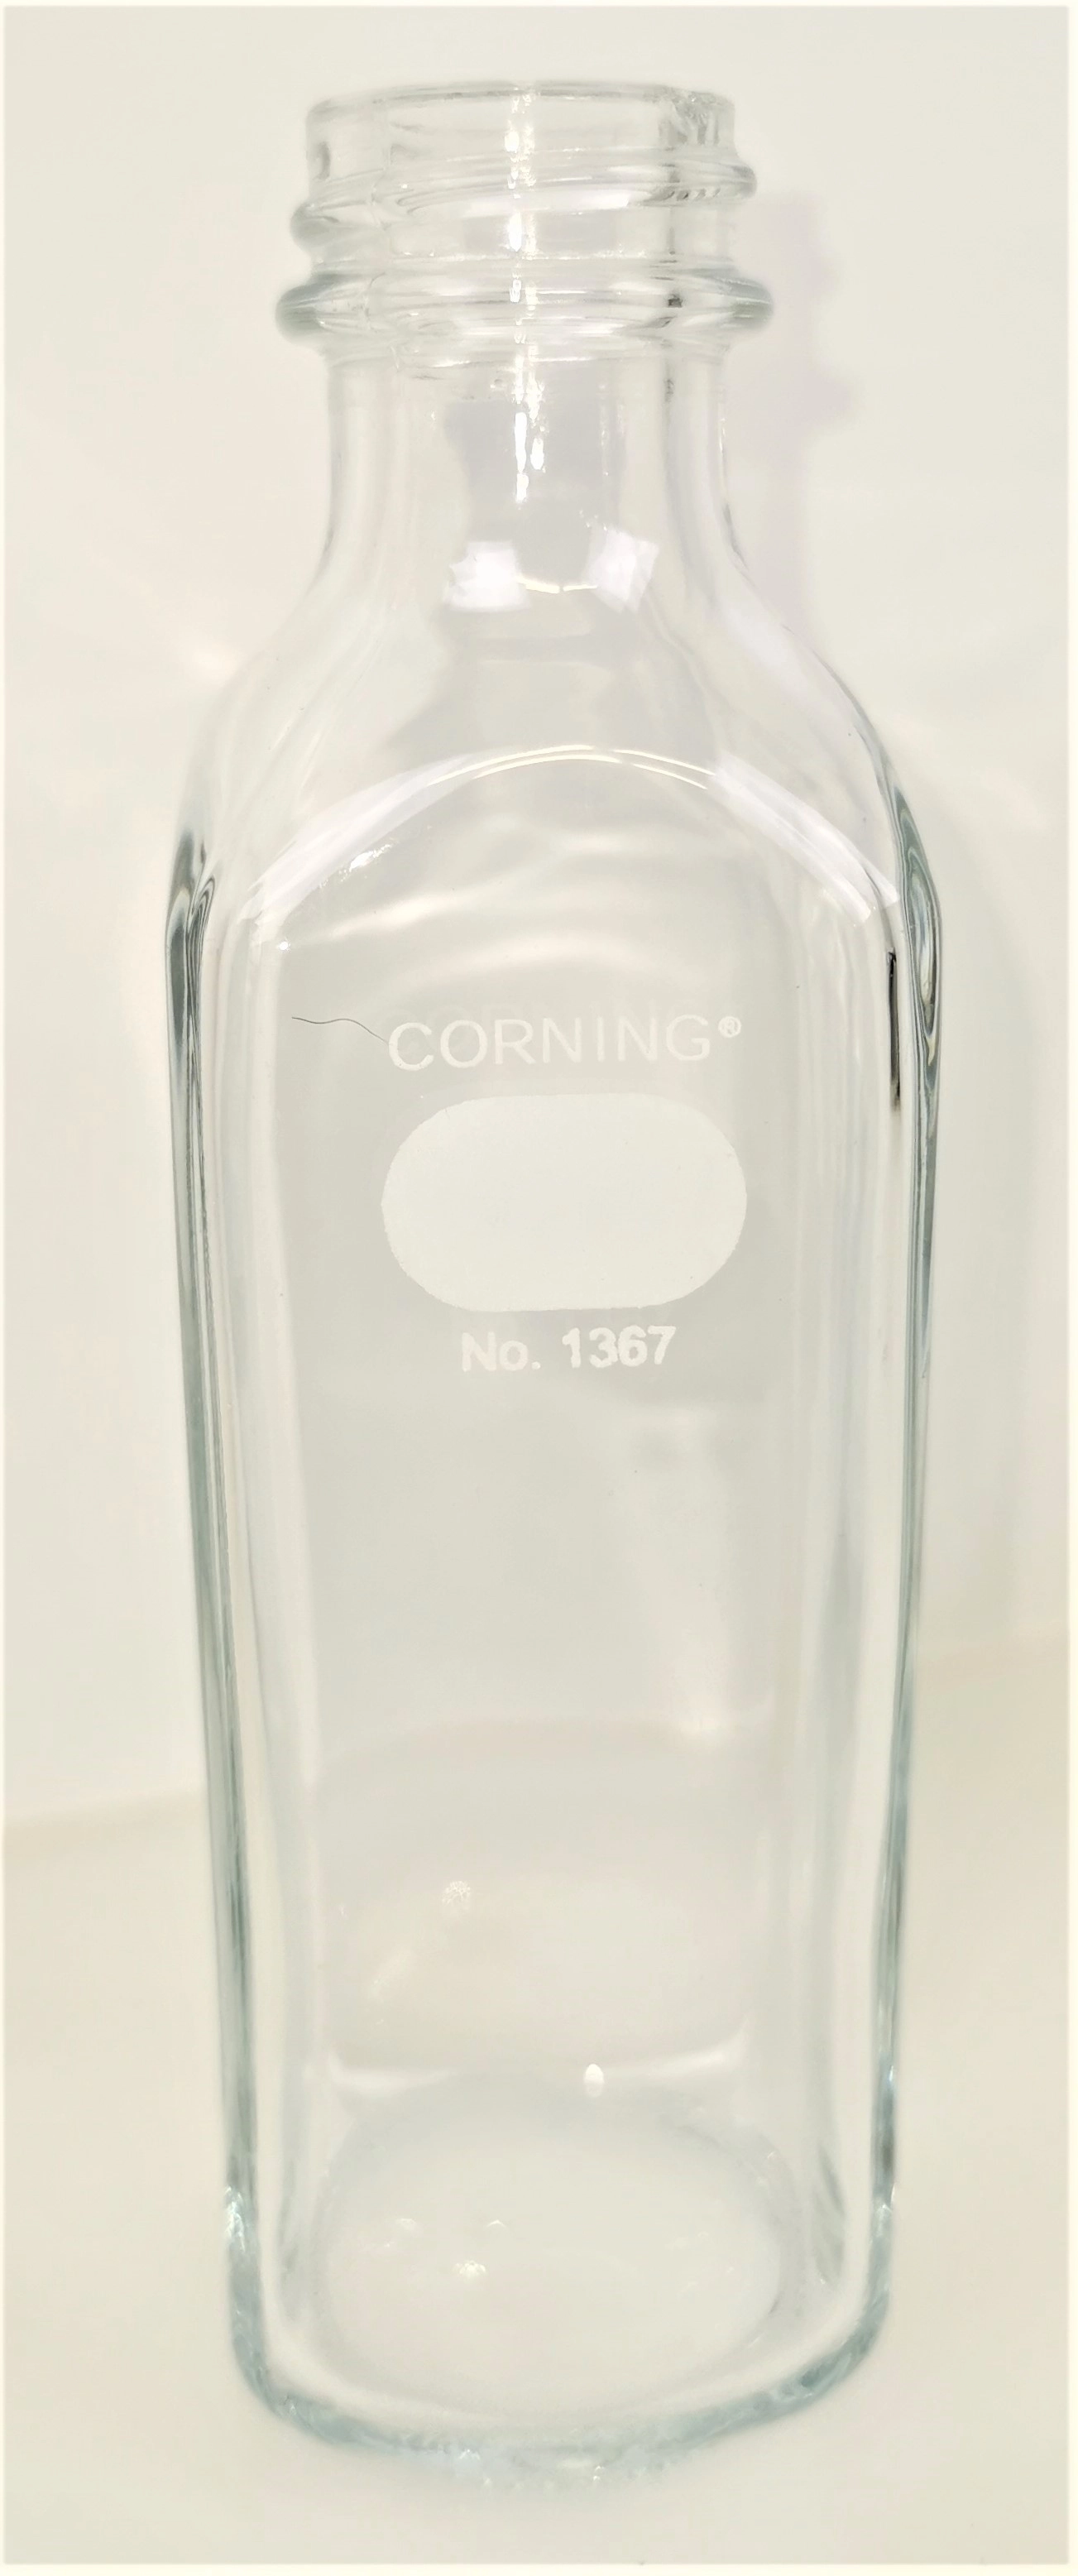 Corning PYREX 1367 and Kimble 14915 Milk Dilution Bottle - 160mL